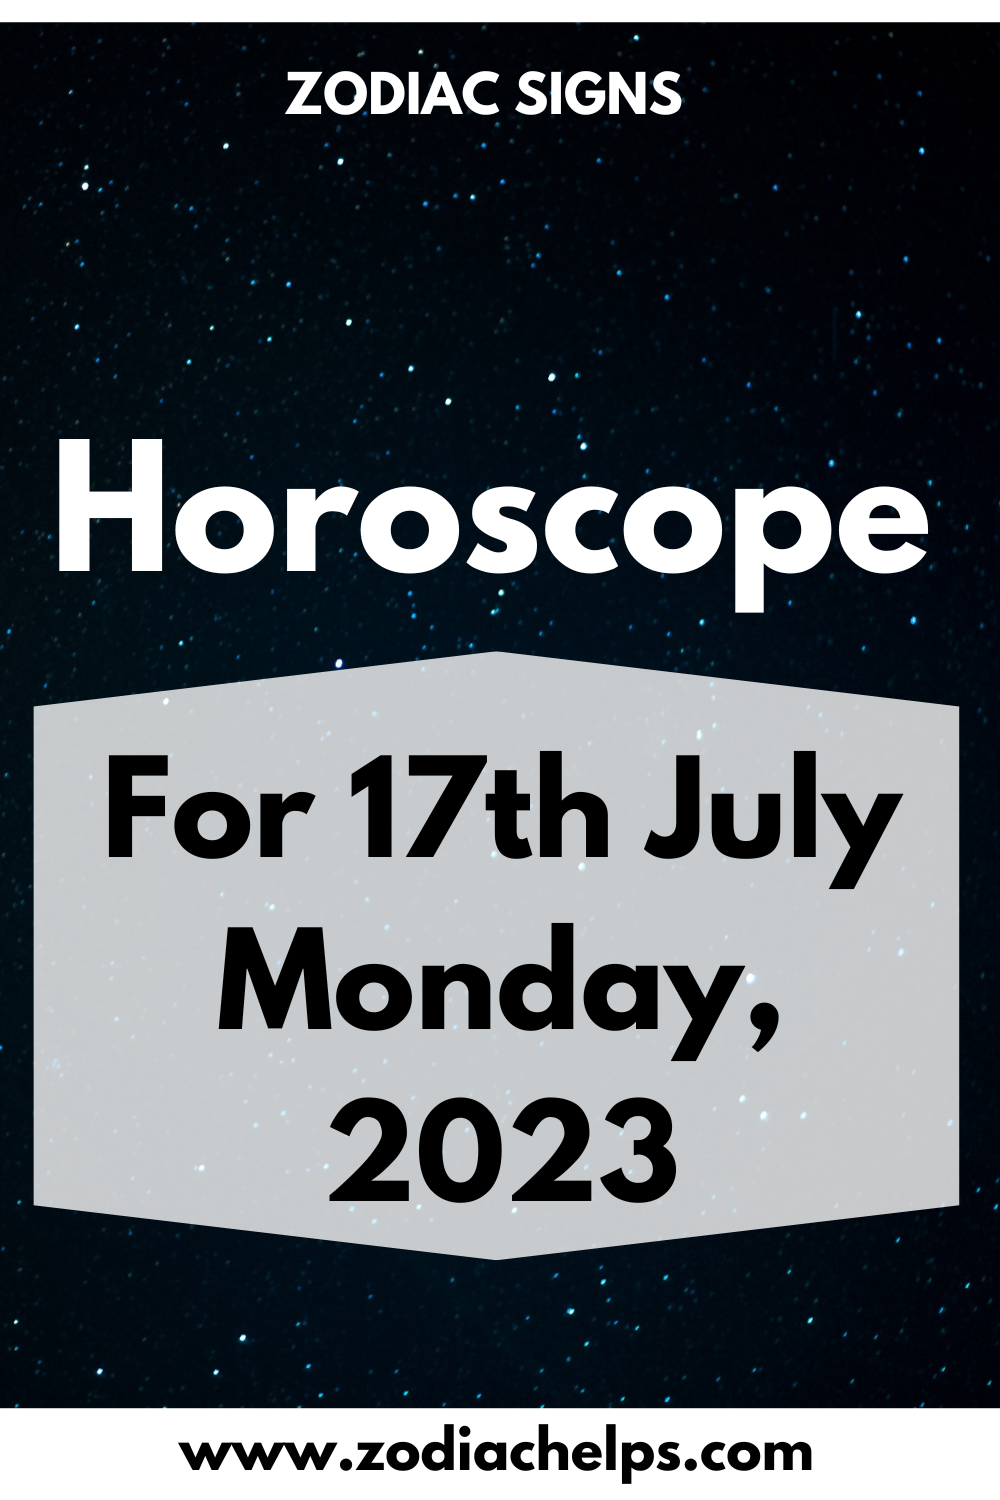 Horoscope for 17th July Monday, 2023